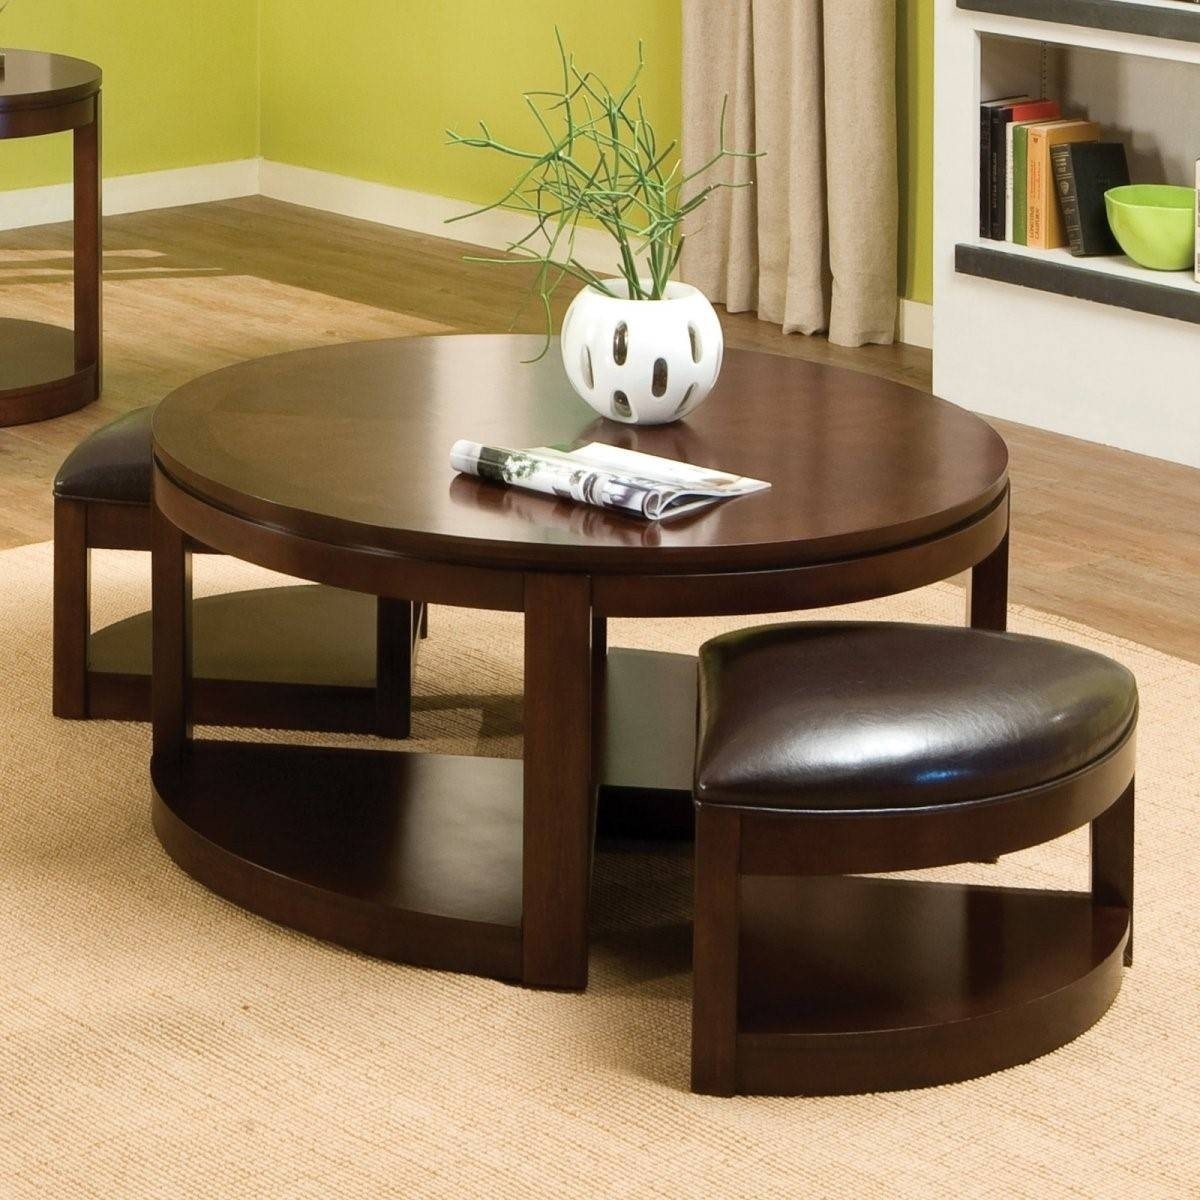 Round coffee table with stools 6